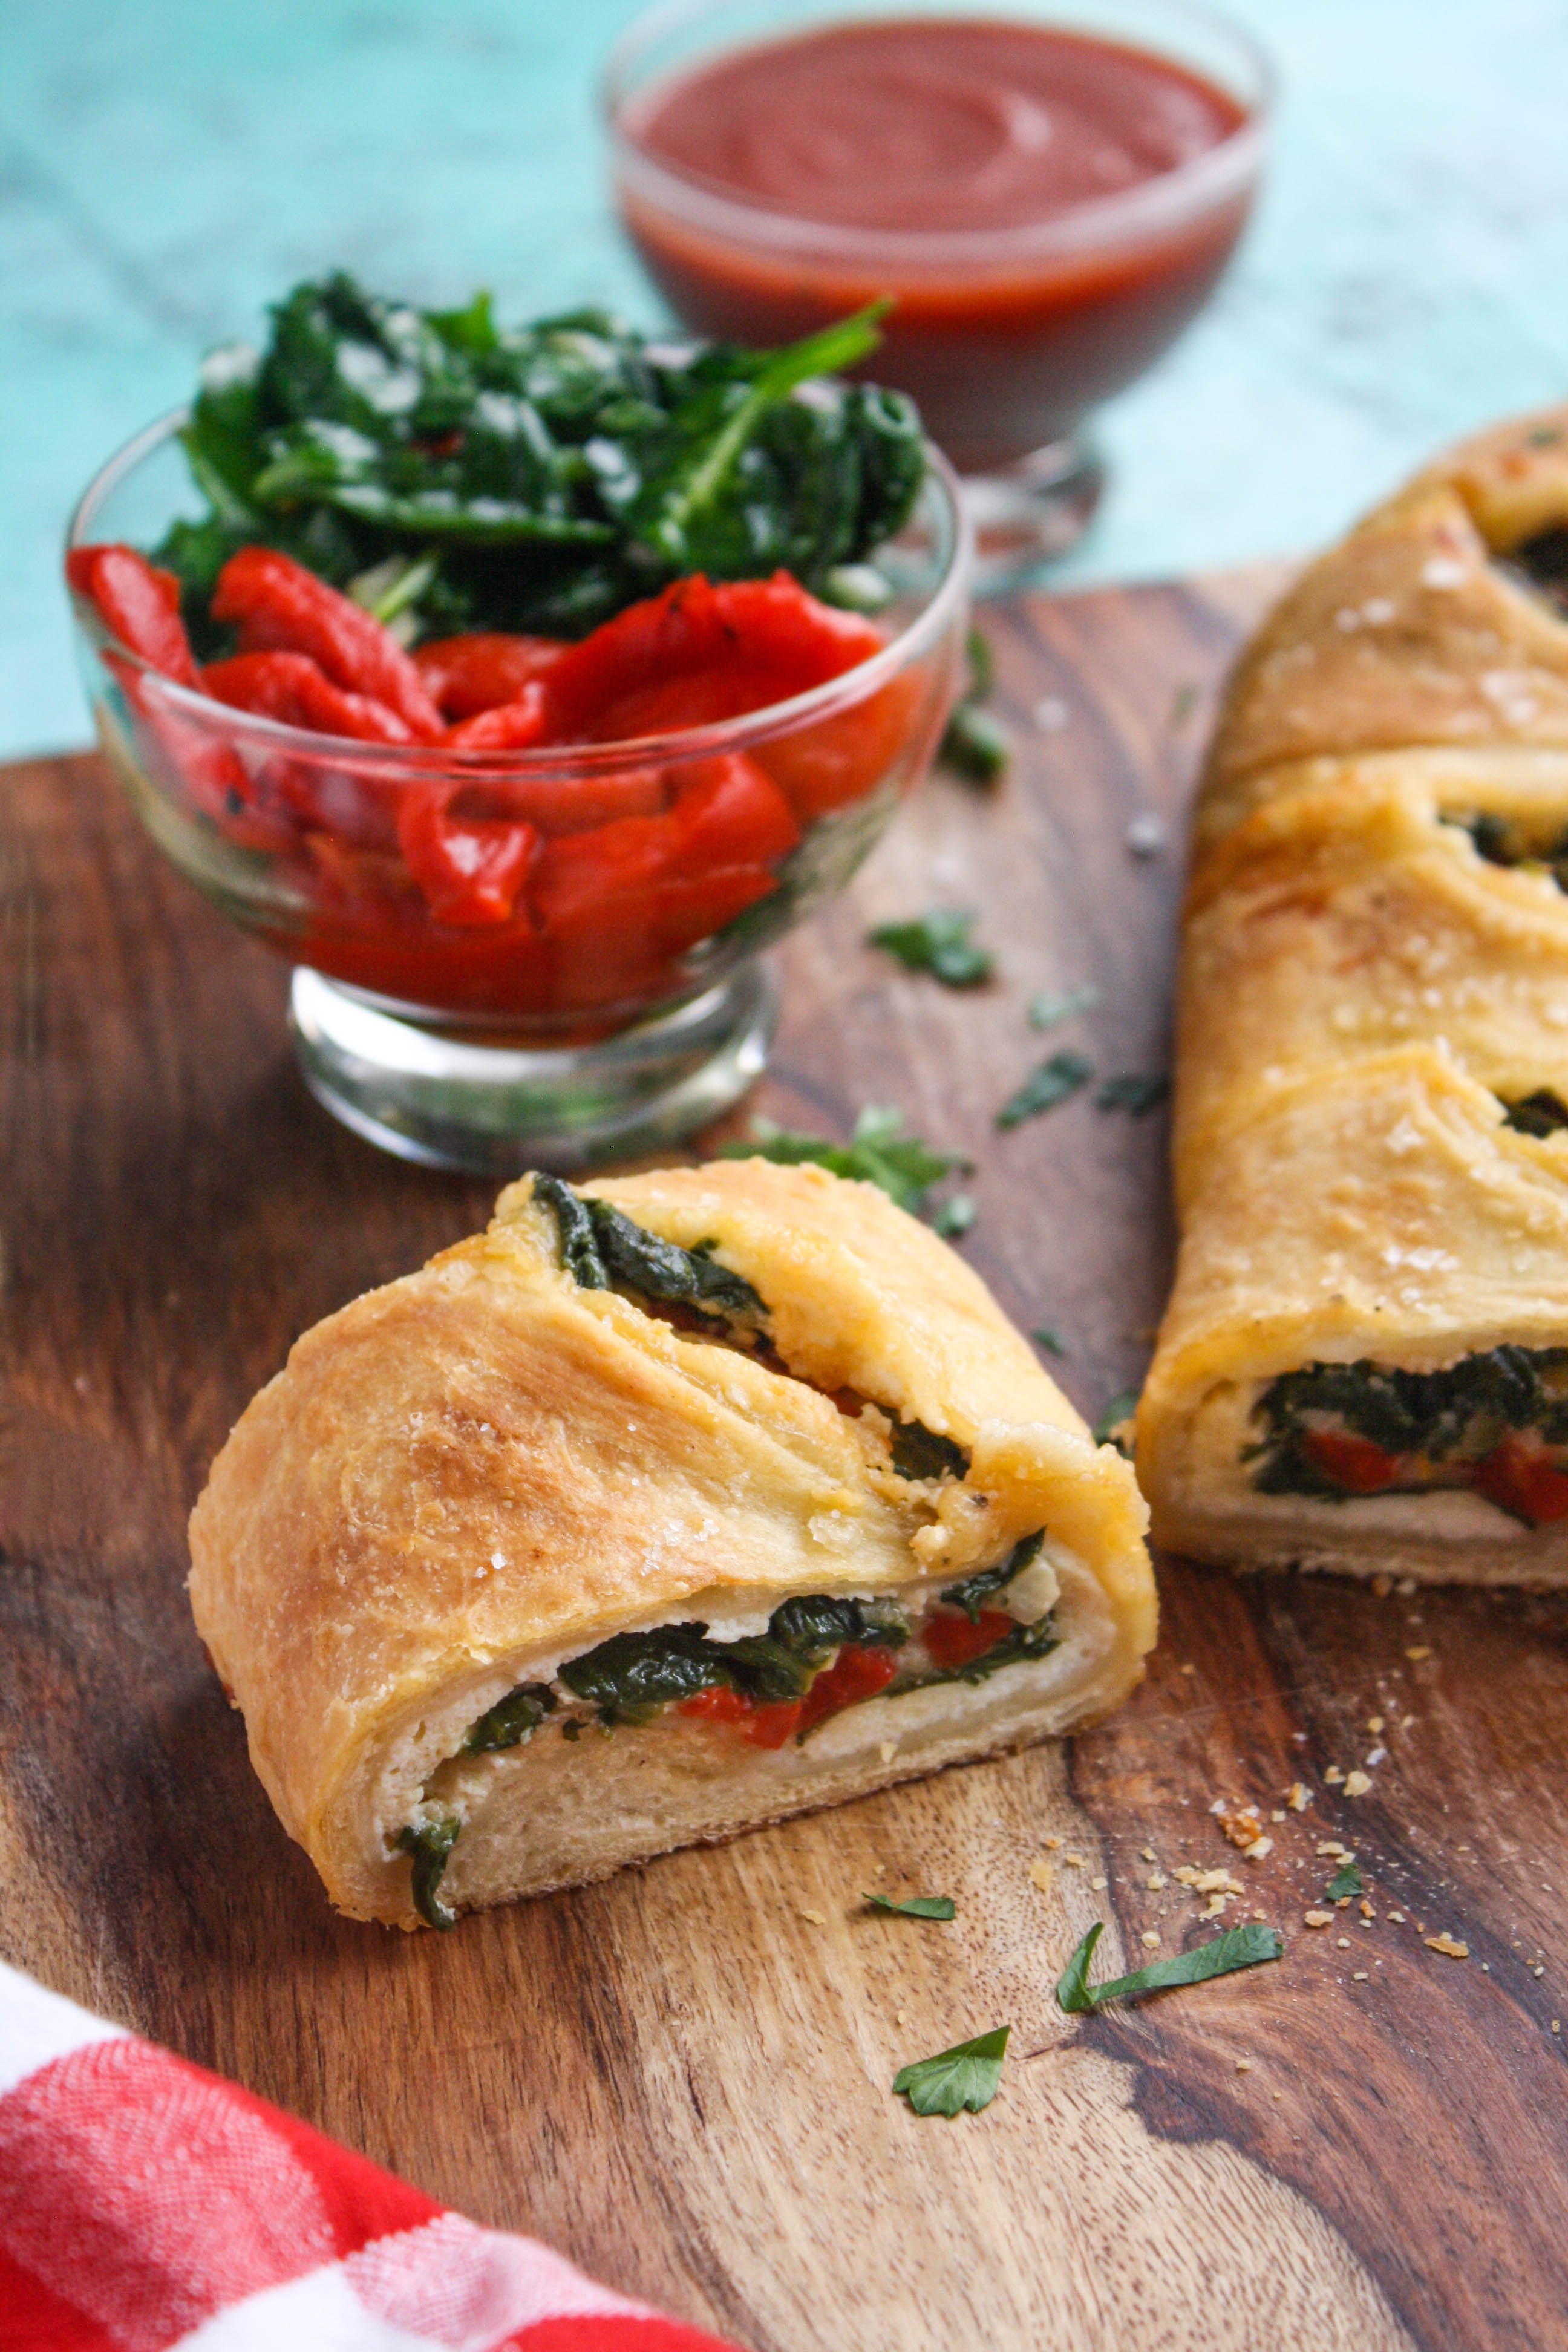 Spinach and Roasted Red Pepper Stromboli is a delightful pizza-like treat. Stromboli is an easy-to-make dish for any night of the week!